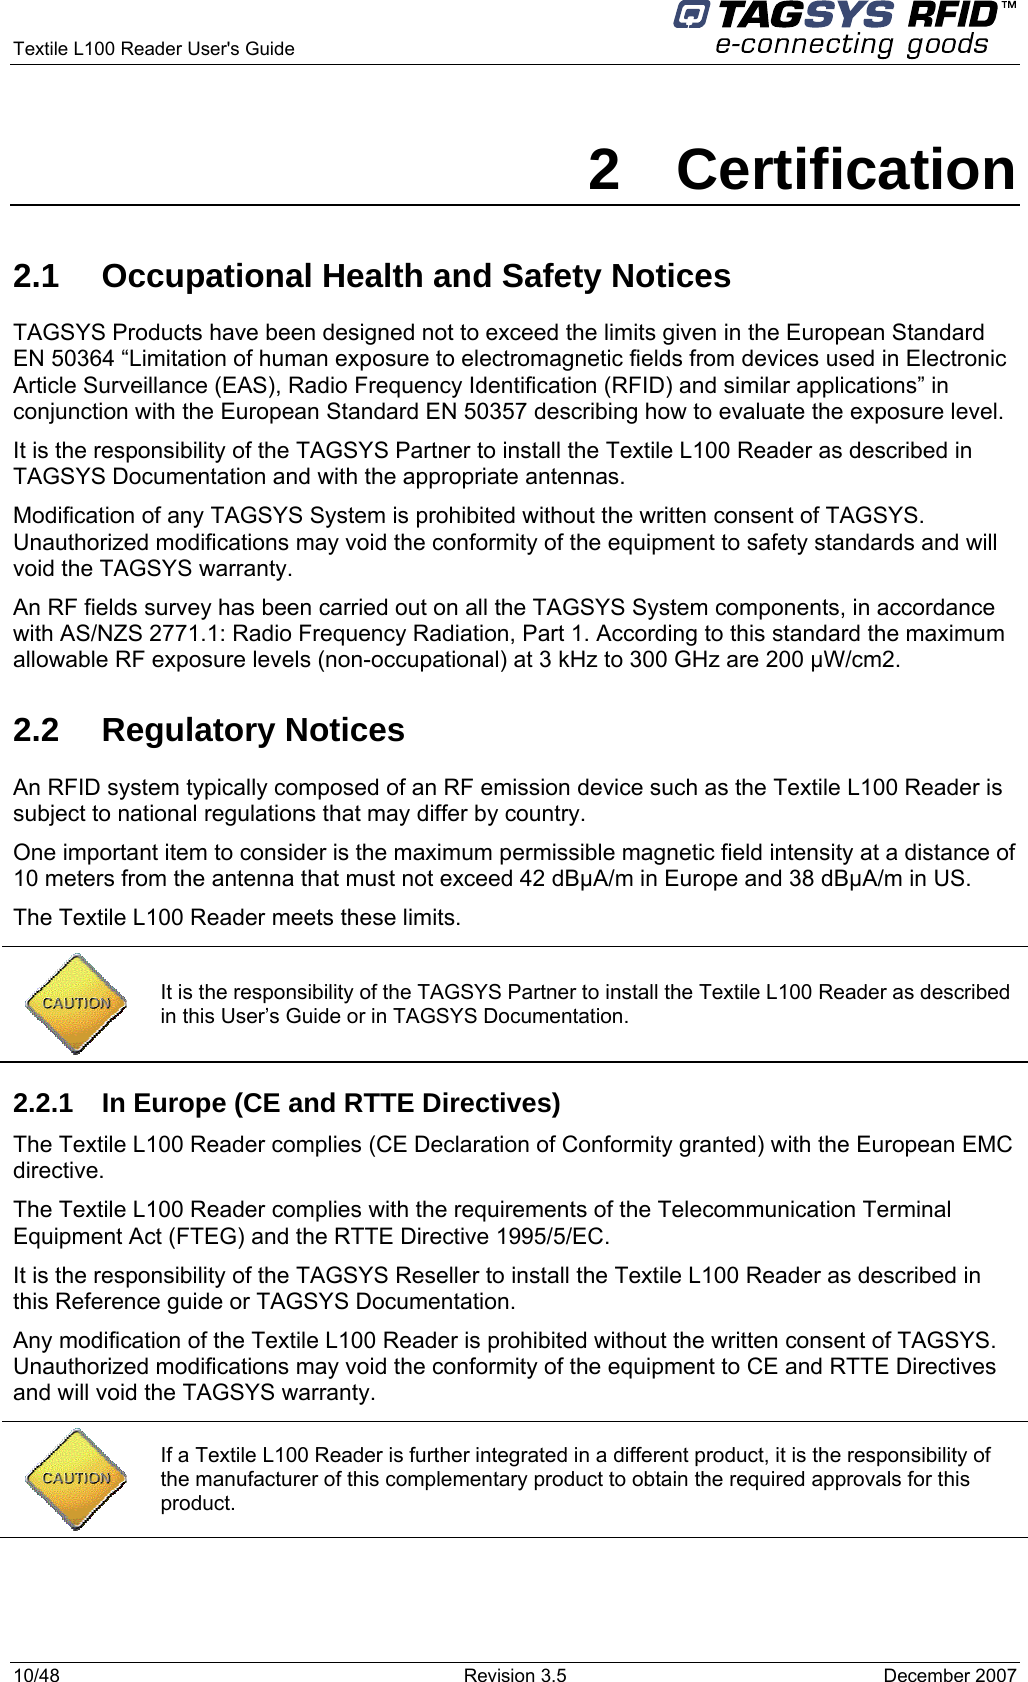  Textile L100 Reader User&apos;s Guide     10/48  Revision 3.5  December 2007 2 Certification 2.1  Occupational Health and Safety Notices TAGSYS Products have been designed not to exceed the limits given in the European Standard EN 50364 “Limitation of human exposure to electromagnetic fields from devices used in Electronic Article Surveillance (EAS), Radio Frequency Identification (RFID) and similar applications” in conjunction with the European Standard EN 50357 describing how to evaluate the exposure level. It is the responsibility of the TAGSYS Partner to install the Textile L100 Reader as described in TAGSYS Documentation and with the appropriate antennas.  Modification of any TAGSYS System is prohibited without the written consent of TAGSYS. Unauthorized modifications may void the conformity of the equipment to safety standards and will void the TAGSYS warranty. An RF fields survey has been carried out on all the TAGSYS System components, in accordance with AS/NZS 2771.1: Radio Frequency Radiation, Part 1. According to this standard the maximum allowable RF exposure levels (non-occupational) at 3 kHz to 300 GHz are 200 µW/cm2.  2.2 Regulatory Notices An RFID system typically composed of an RF emission device such as the Textile L100 Reader is subject to national regulations that may differ by country. One important item to consider is the maximum permissible magnetic field intensity at a distance of 10 meters from the antenna that must not exceed 42 dBµA/m in Europe and 38 dBµA/m in US. The Textile L100 Reader meets these limits.  2.2.1  In Europe (CE and RTTE Directives)  The Textile L100 Reader complies (CE Declaration of Conformity granted) with the European EMC directive. The Textile L100 Reader complies with the requirements of the Telecommunication Terminal Equipment Act (FTEG) and the RTTE Directive 1995/5/EC. It is the responsibility of the TAGSYS Reseller to install the Textile L100 Reader as described in this Reference guide or TAGSYS Documentation. Any modification of the Textile L100 Reader is prohibited without the written consent of TAGSYS. Unauthorized modifications may void the conformity of the equipment to CE and RTTE Directives and will void the TAGSYS warranty.   It is the responsibility of the TAGSYS Partner to install the Textile L100 Reader as described in this User’s Guide or in TAGSYS Documentation.  If a Textile L100 Reader is further integrated in a different product, it is the responsibility of the manufacturer of this complementary product to obtain the required approvals for this product. 